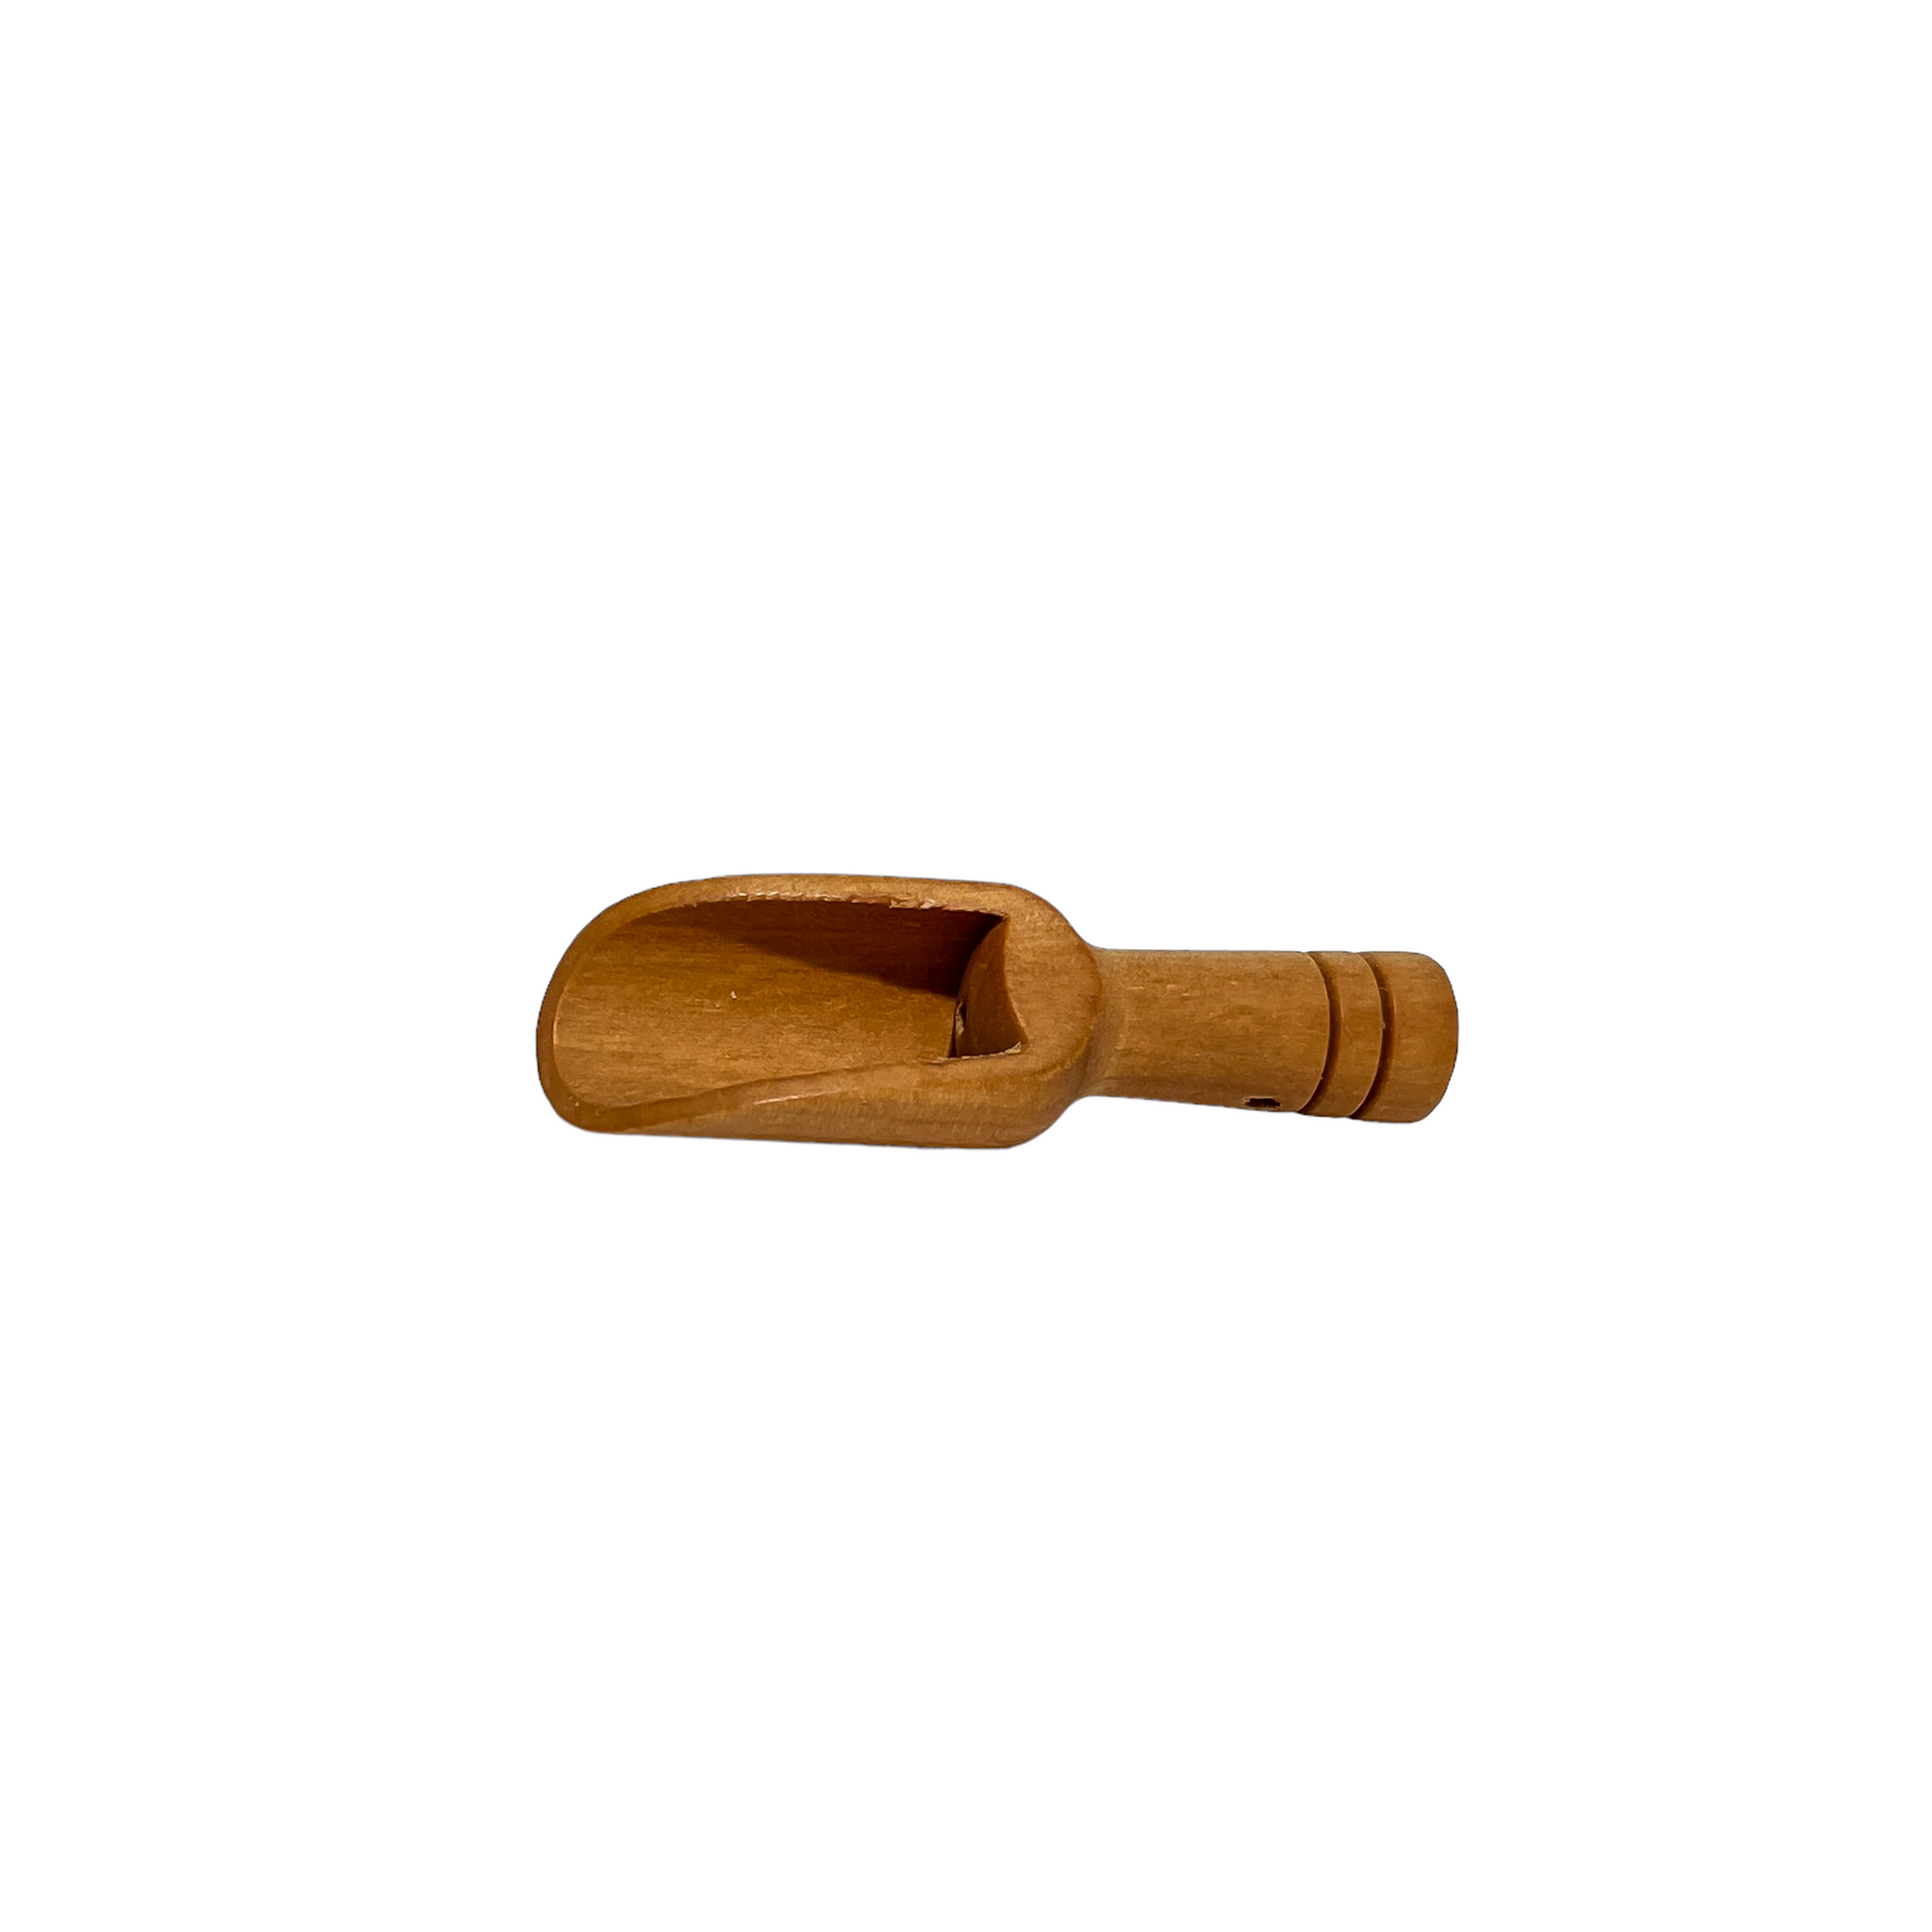 Small wooden spoon for scooping mineral bath soaks